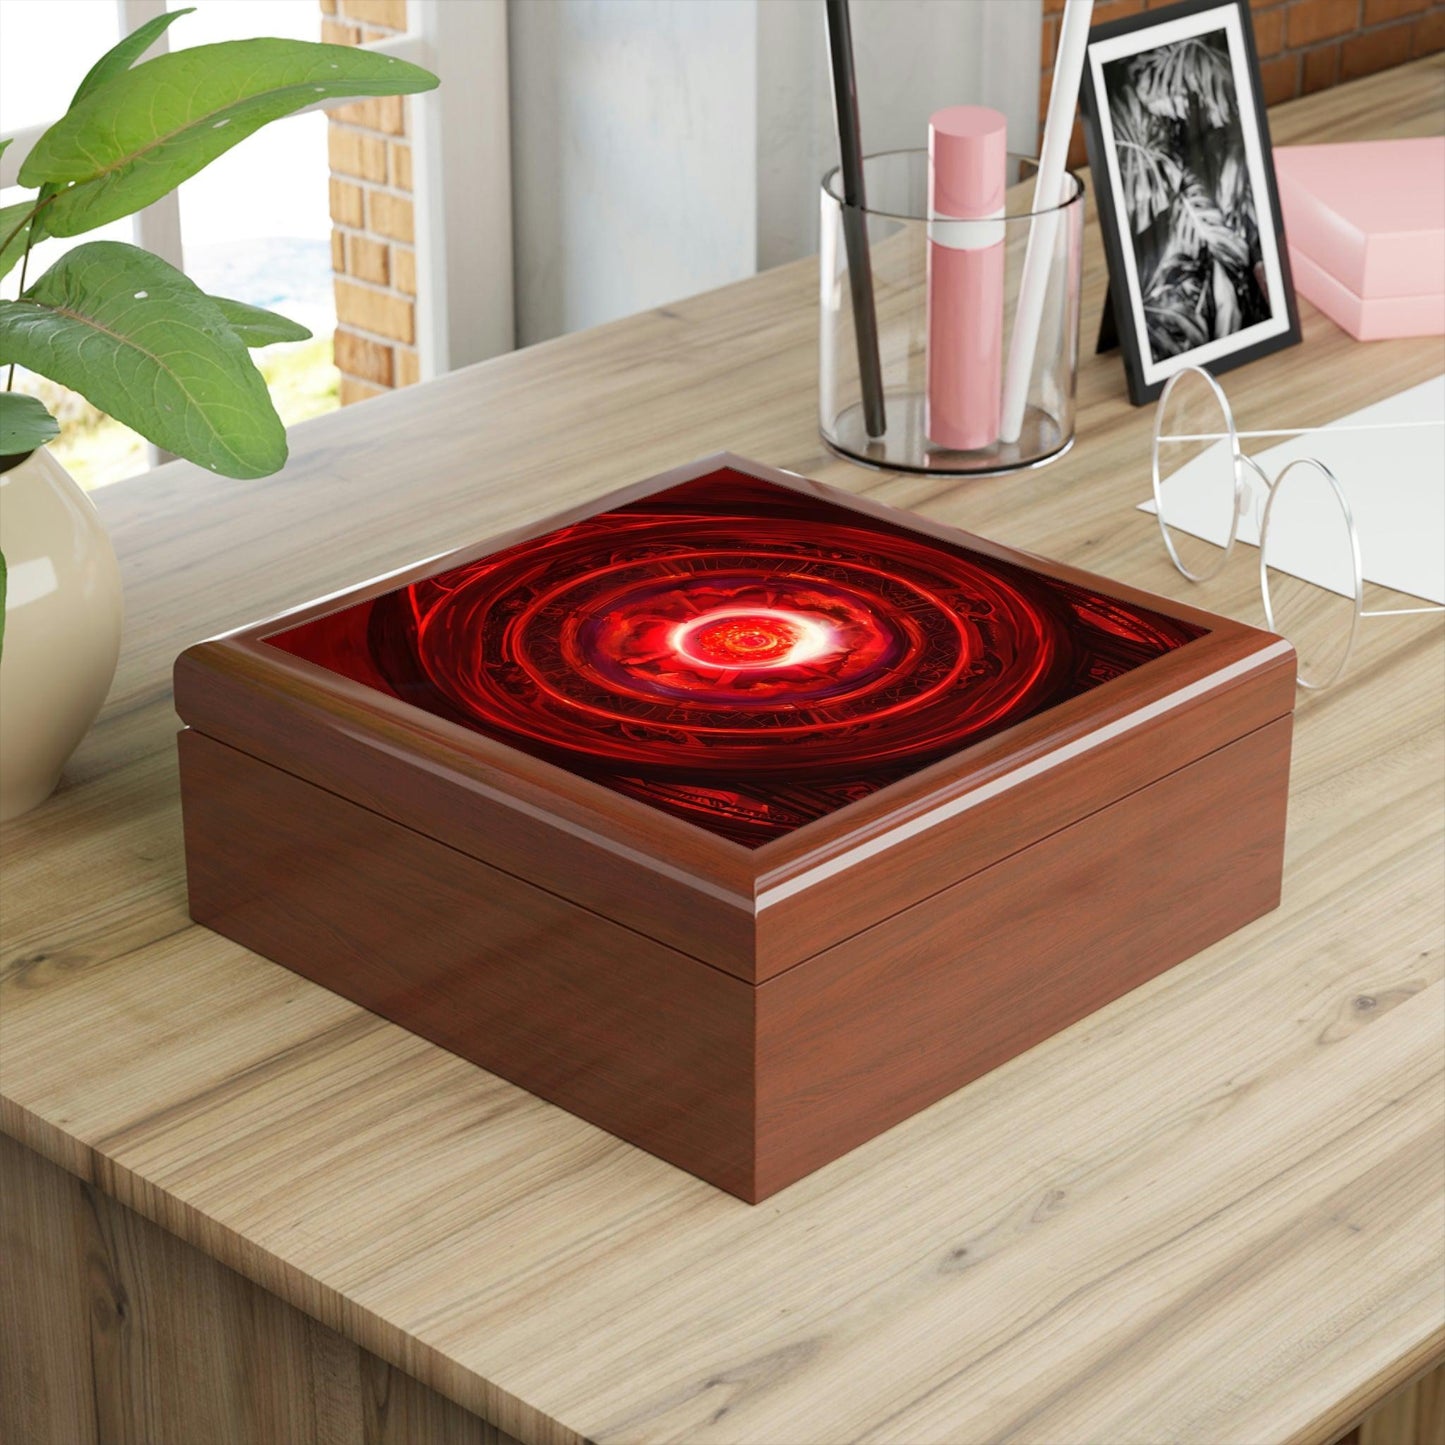 Red-Energy-Portal-Jewelry-Box-to-storing-your-talismans-and-rings-5